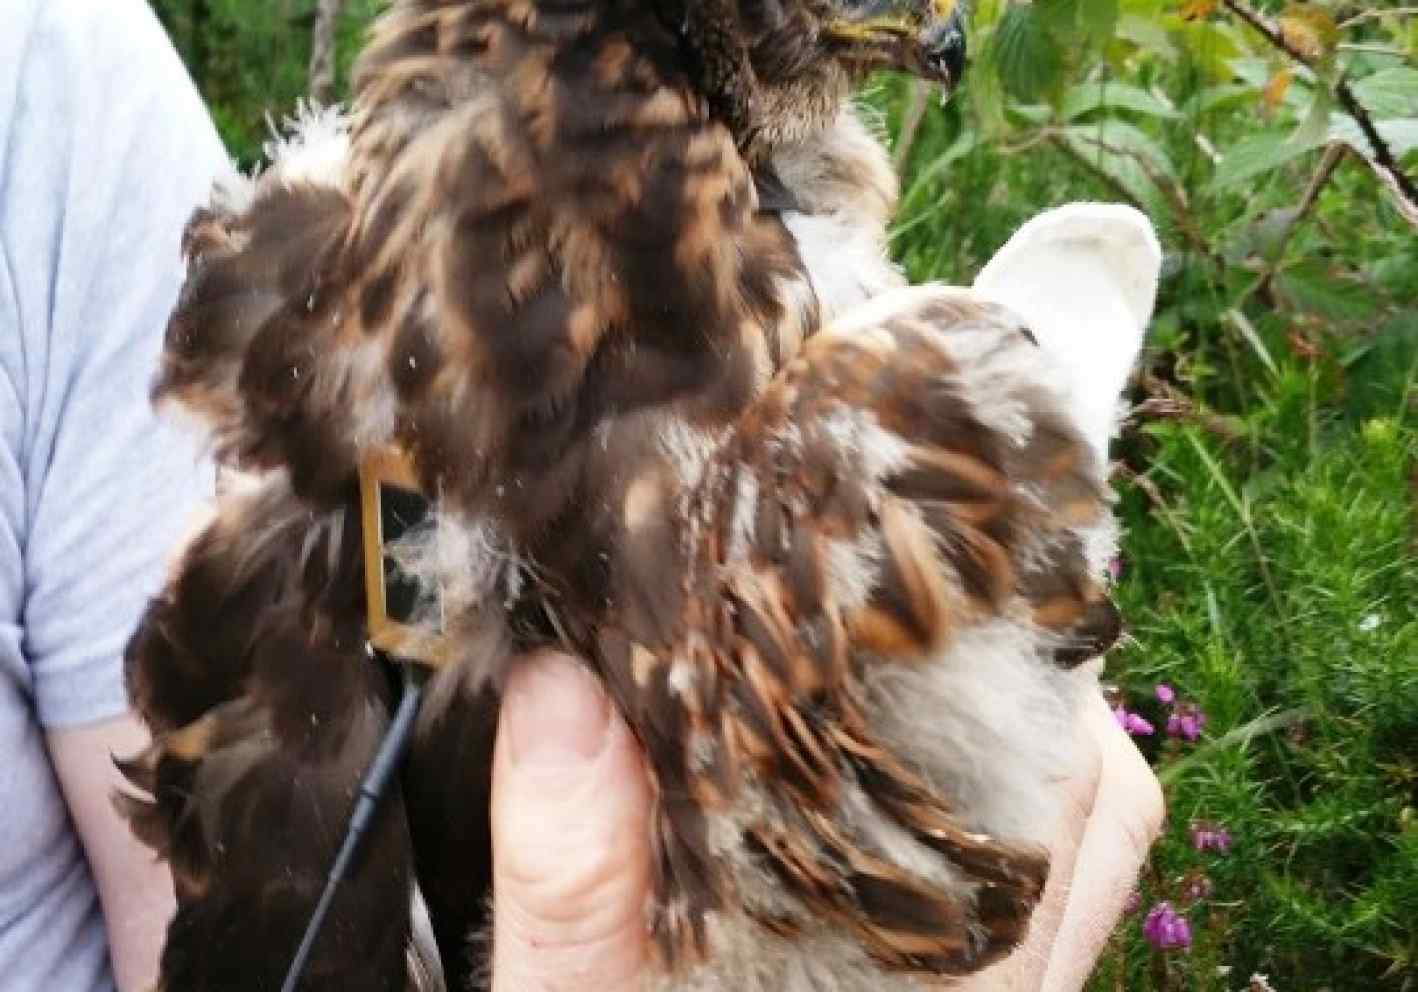 Juv harrier sat tagged in Mullaghareirks, Co. Kerry, July 2016